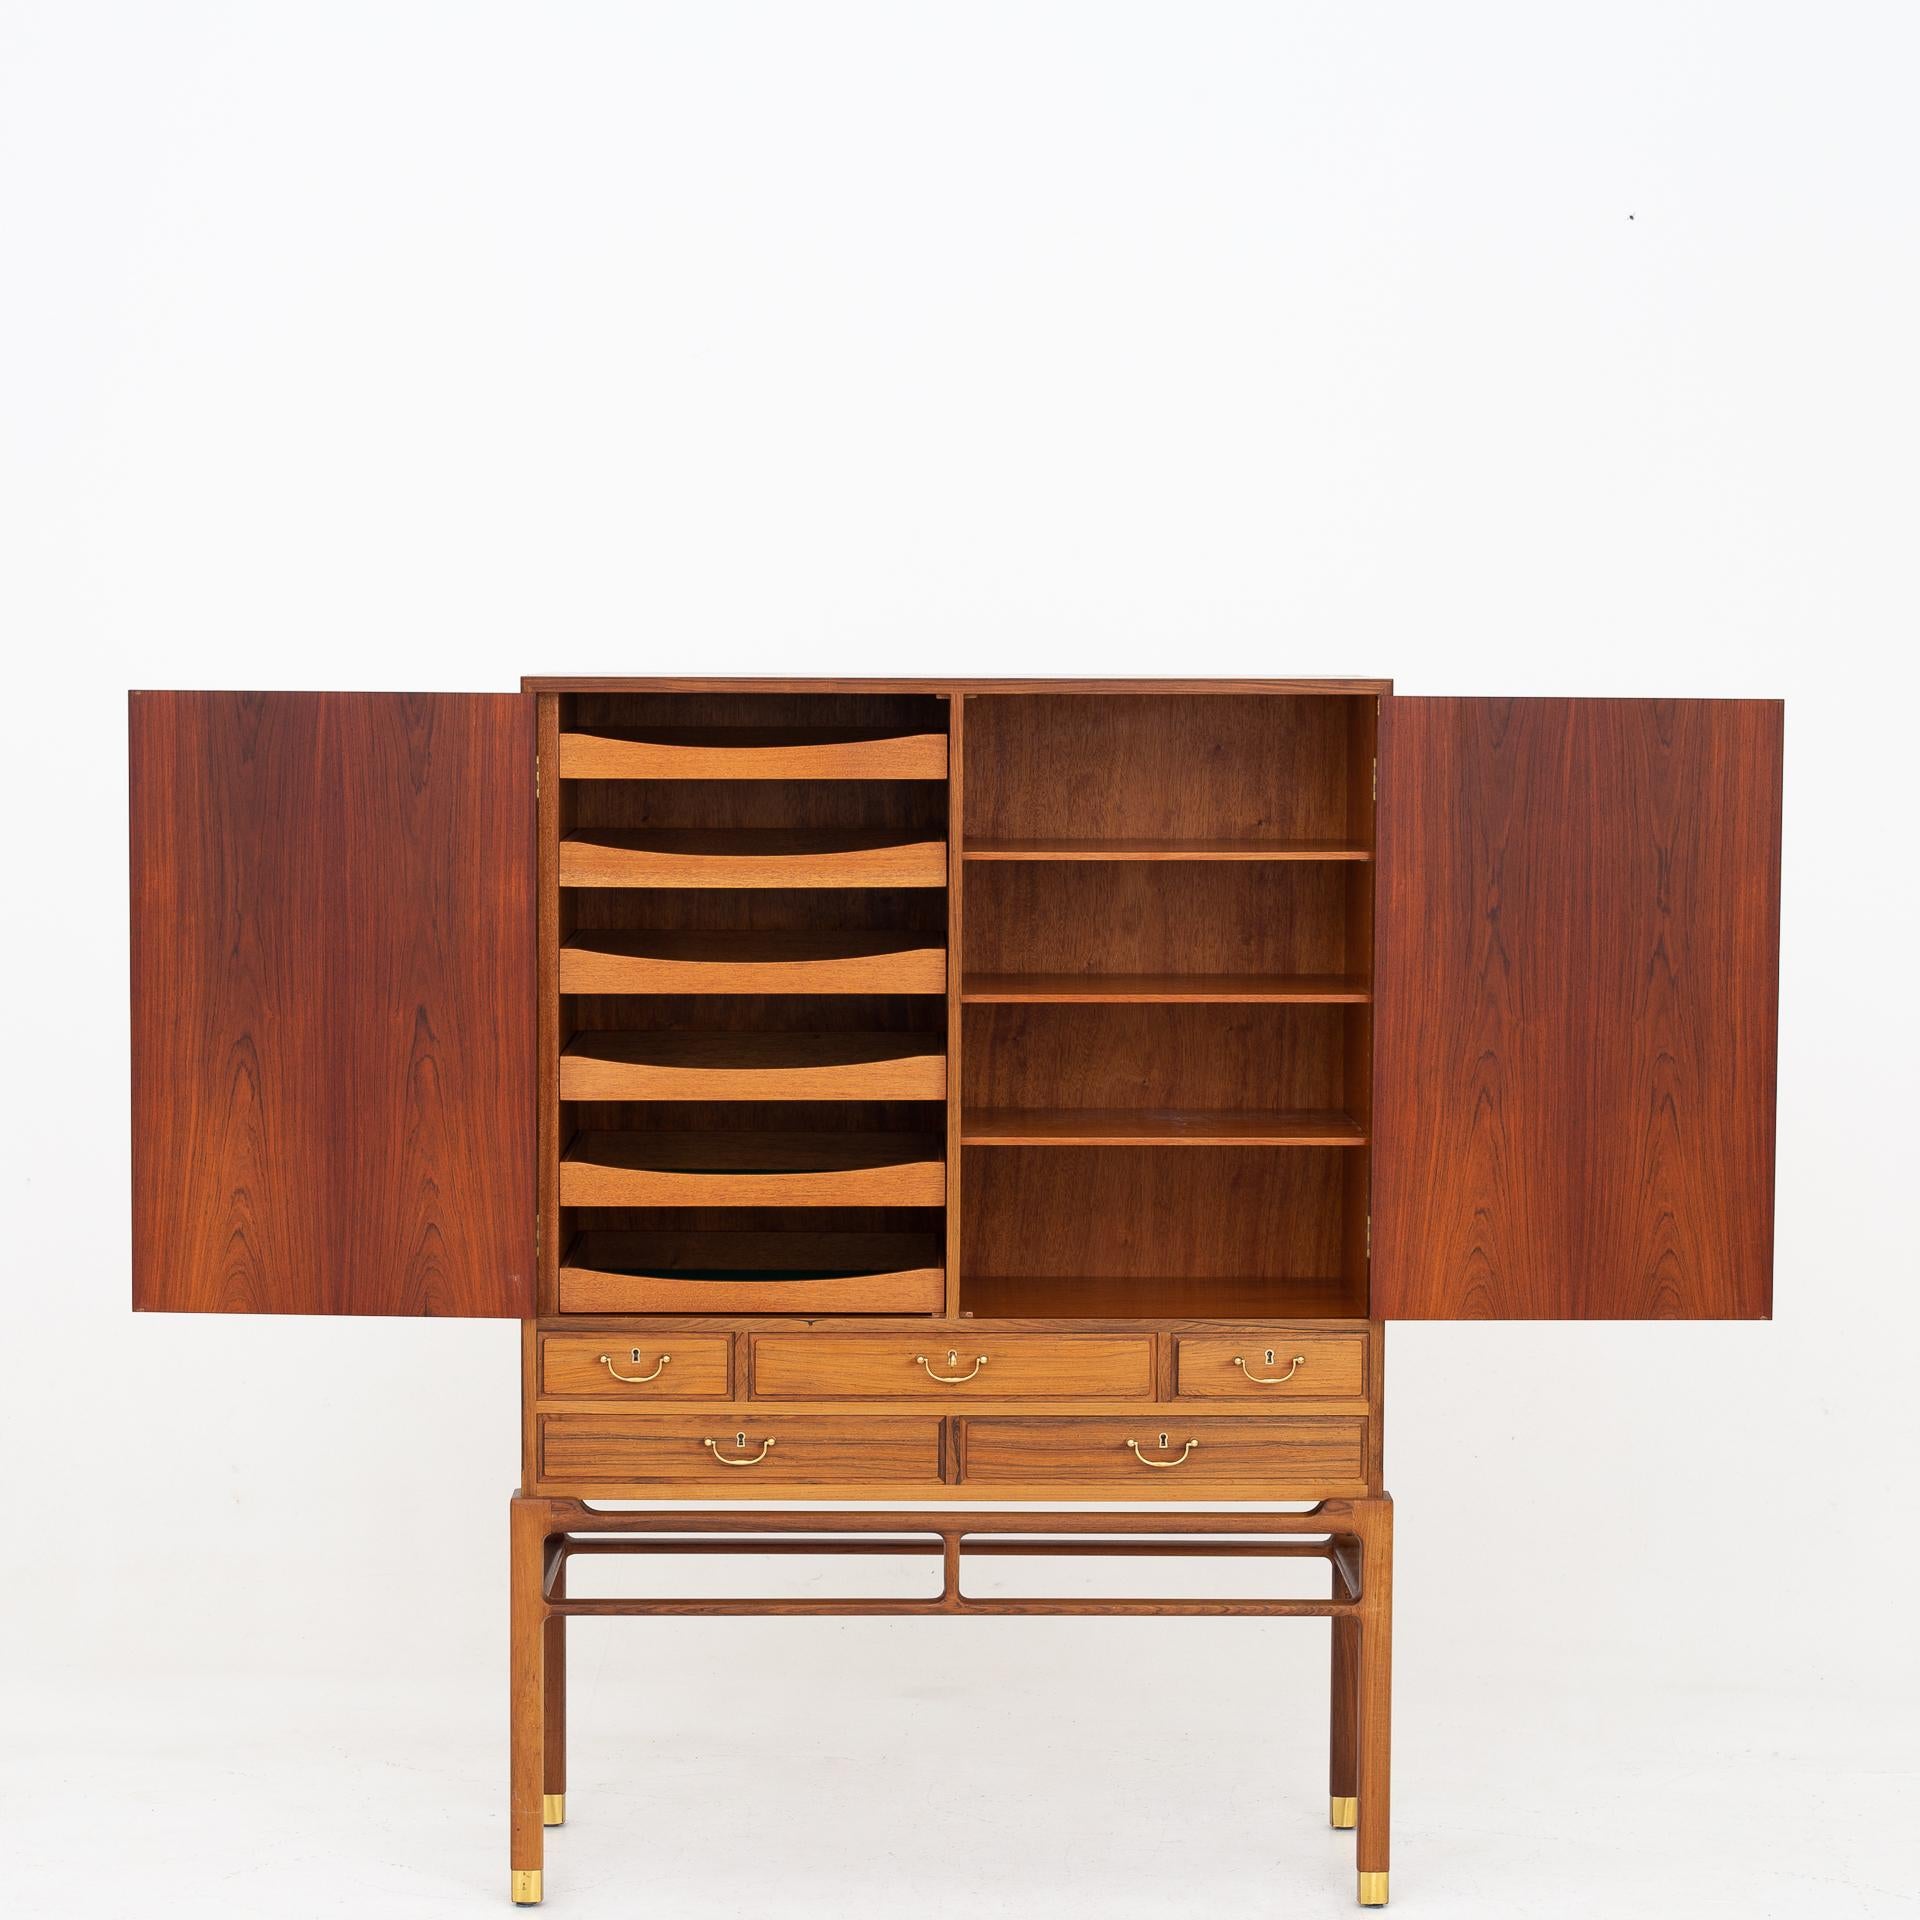 Linen-press in rosewood with drawers, trays and shoes of brass. Jørgen Berg. Maker William Christensen.